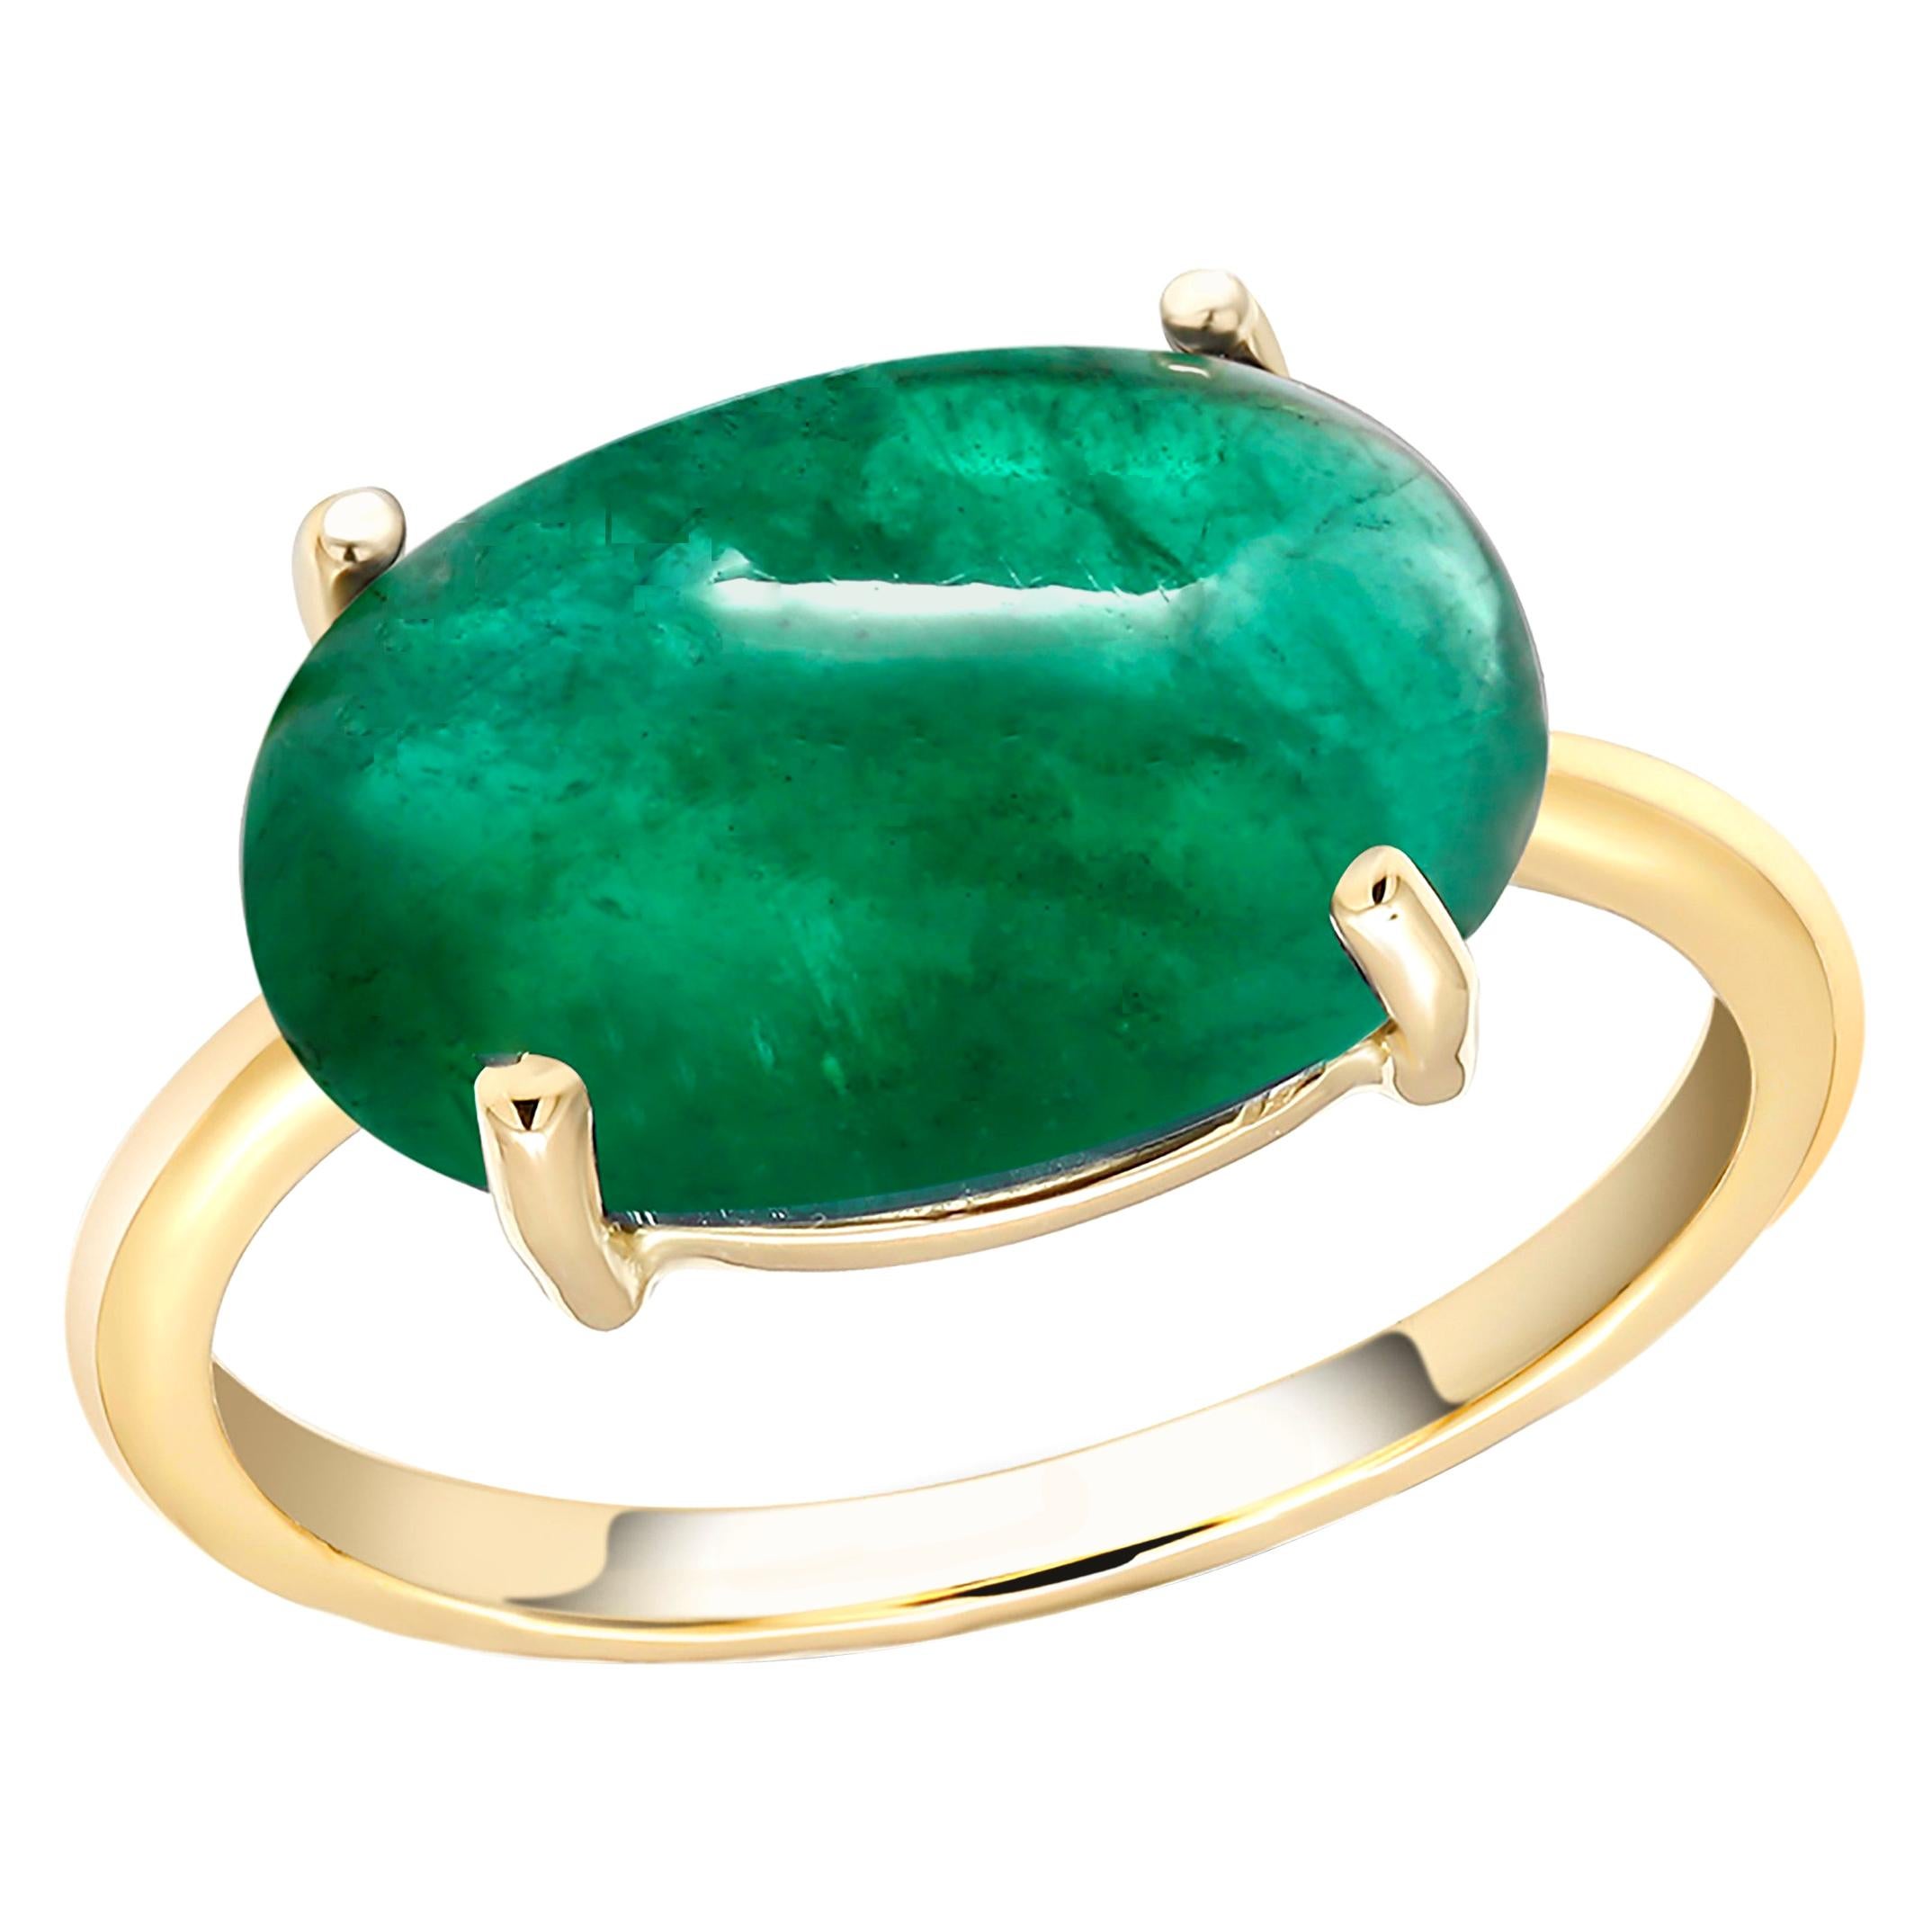 Cabochon Emerald Solitaire Yellow Gold Cocktail Ring Weighing 6.70 Carats